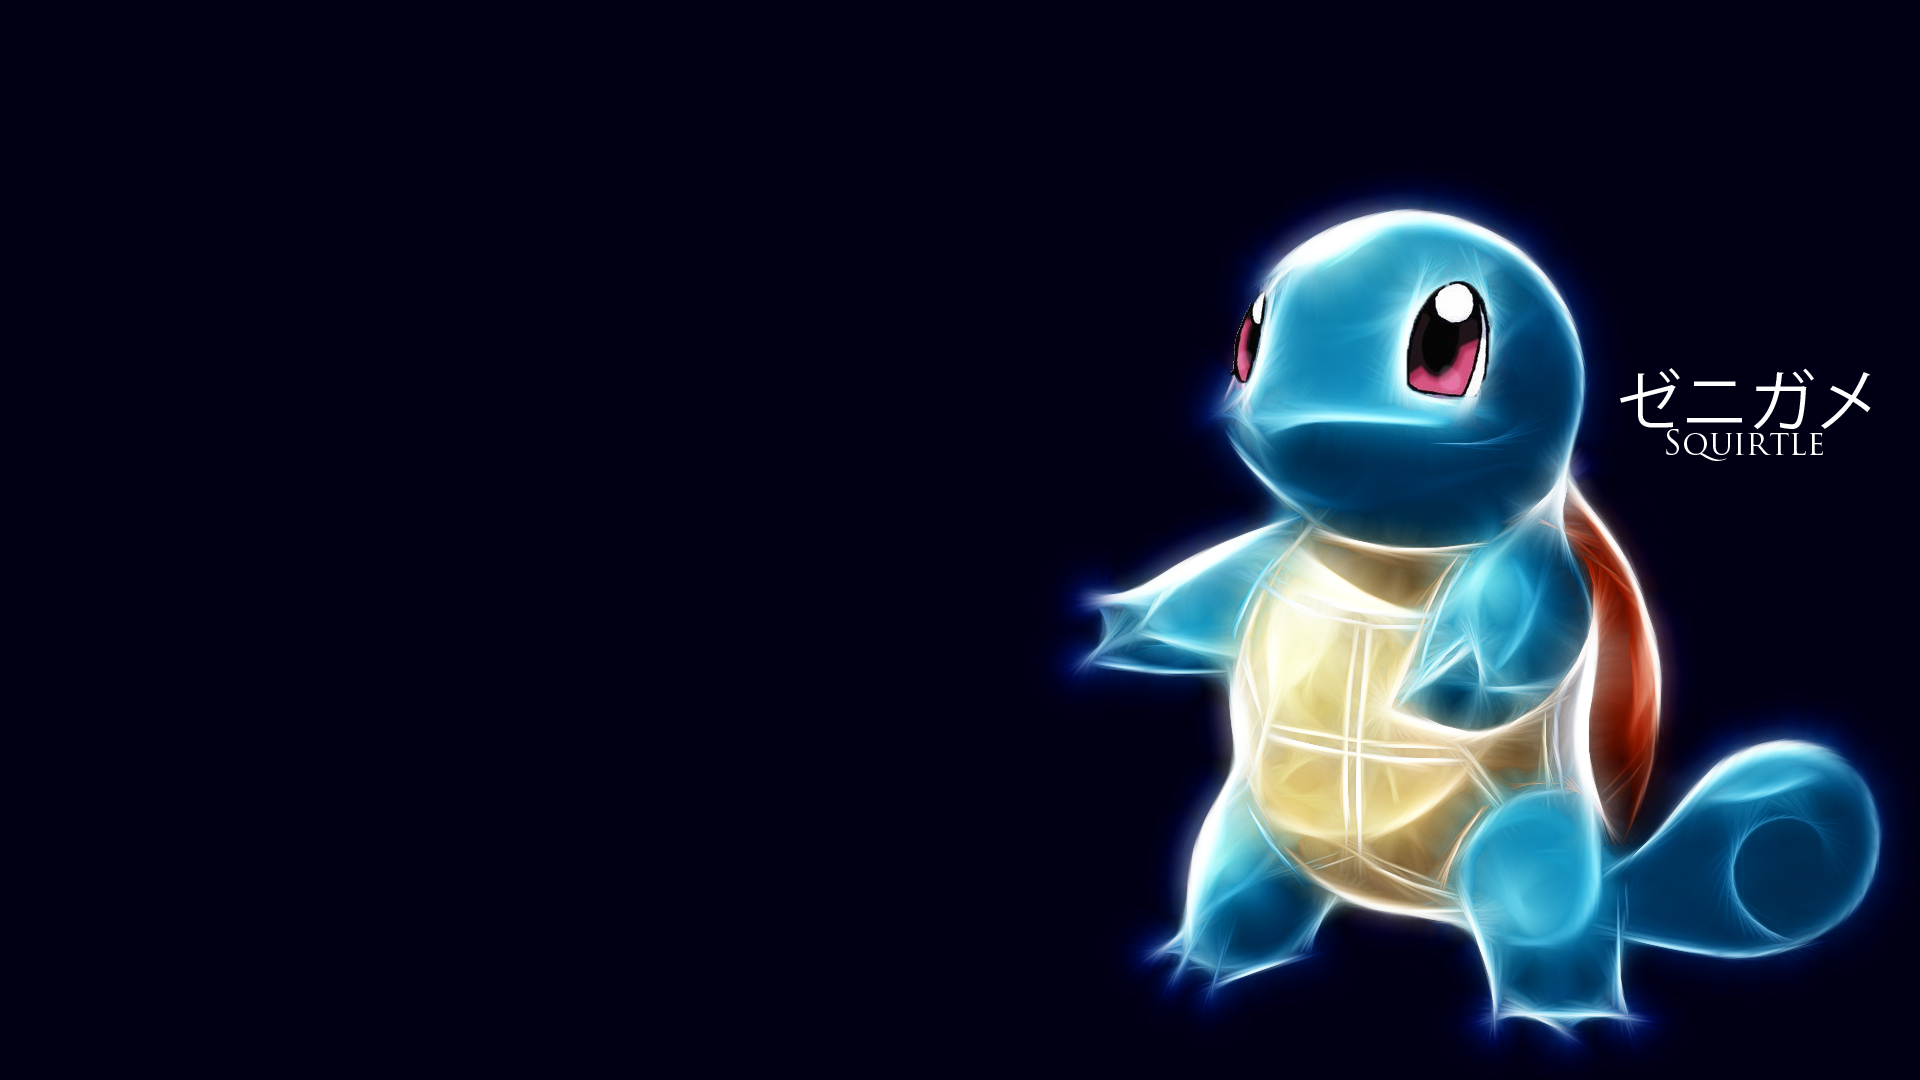 HD Squirtle Wallpaper Full Pictures